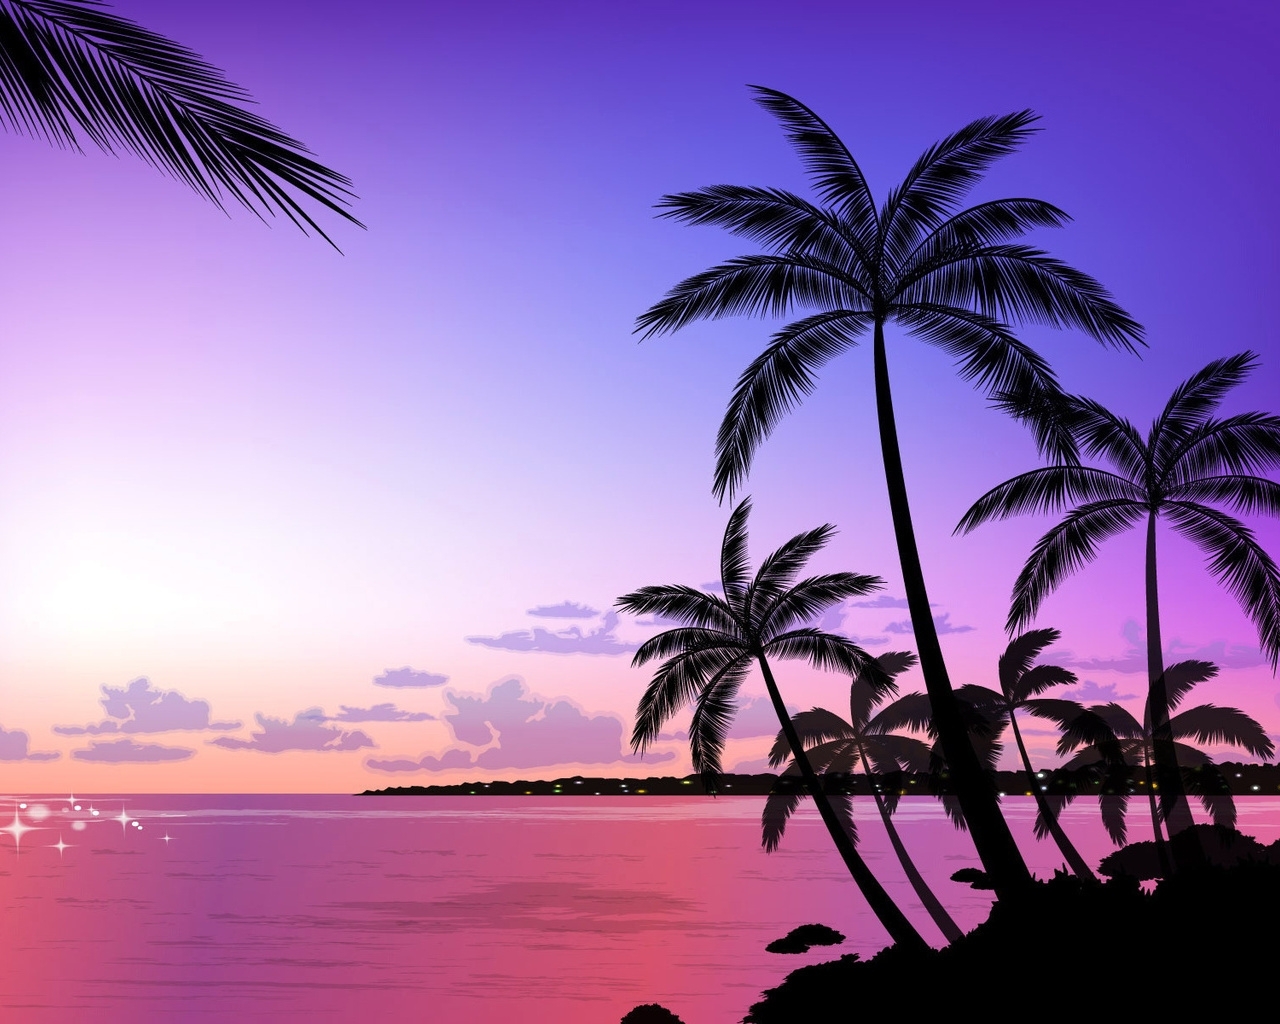 9938 download wallpaper pictures, landscape, sunset, palms screensavers and pictures for free